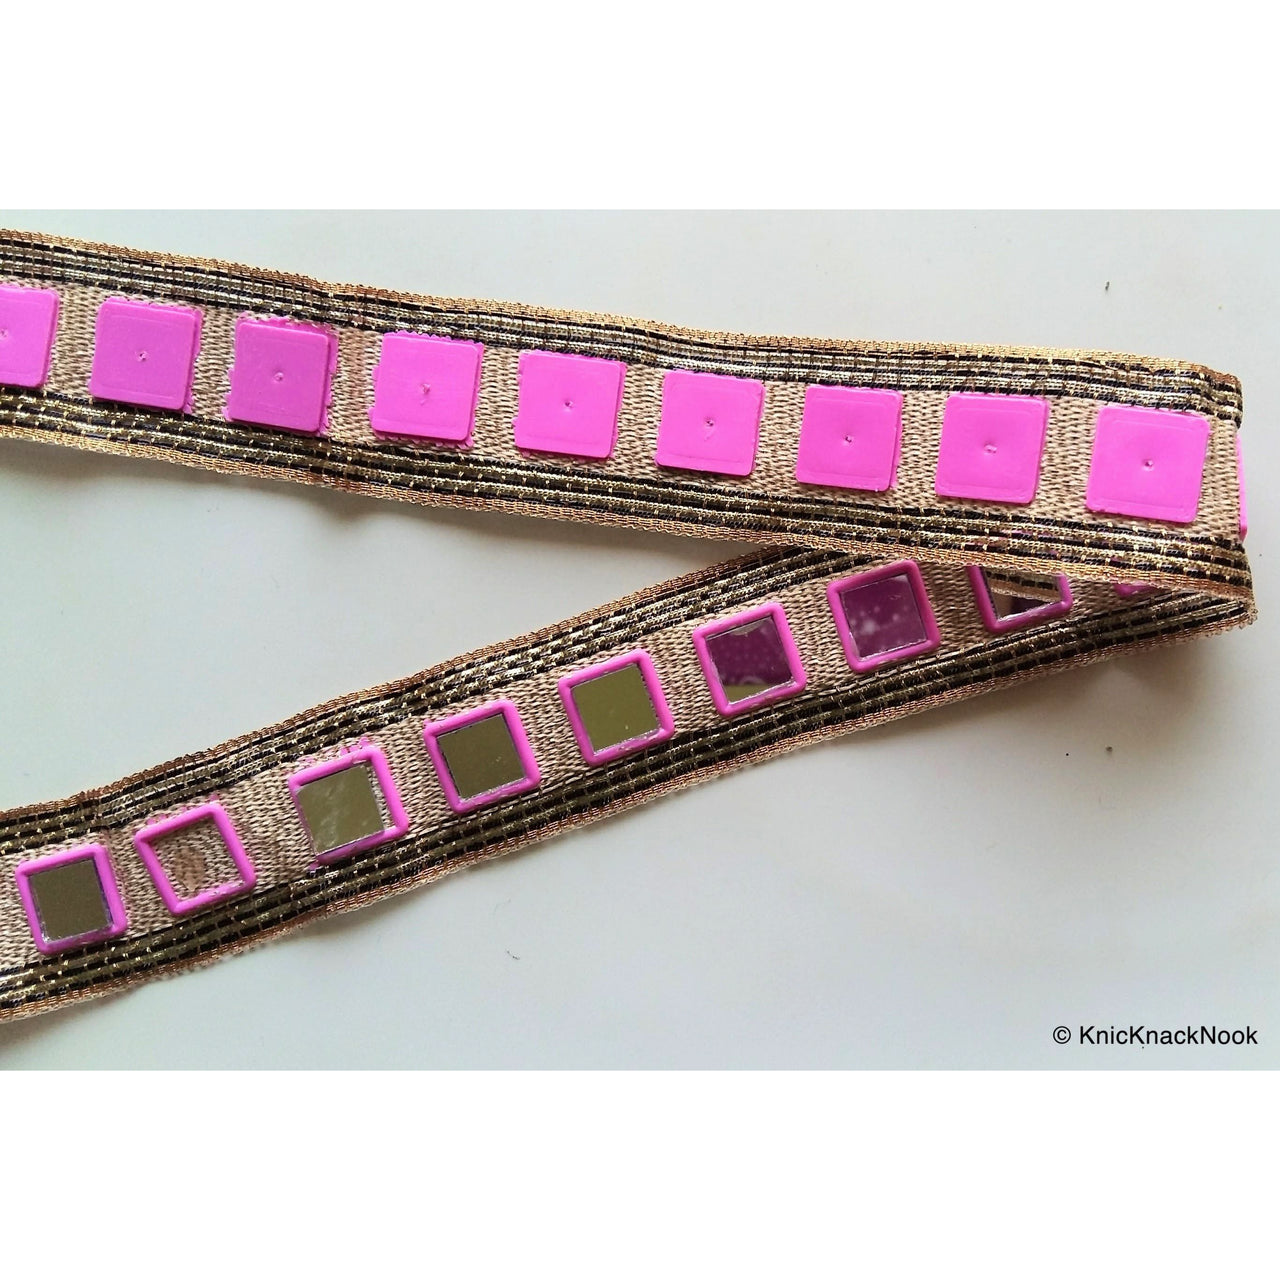 Gold, Black And Pink / Yellow Trim With Mirrors Embellishments - 2200317L244/45Trim